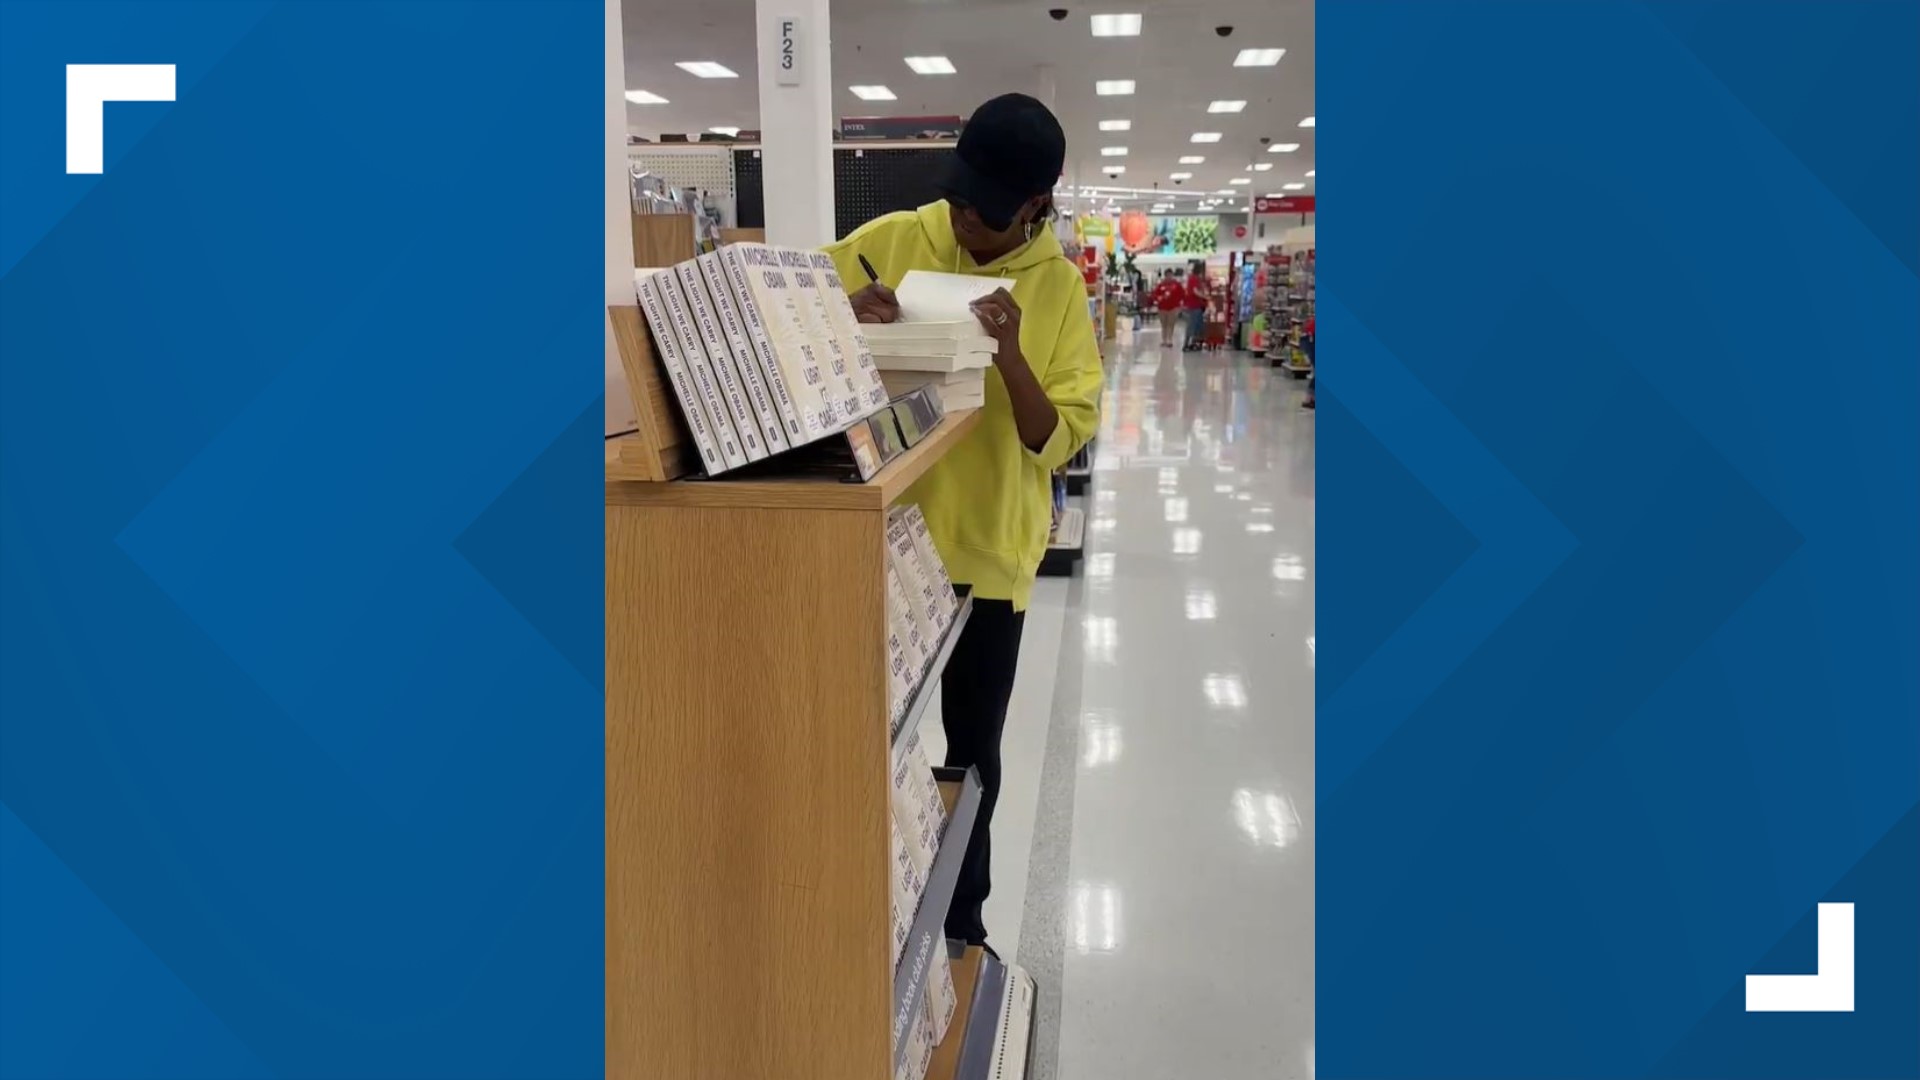 Former First Lady Michelle Obama made a secret stop at a St. Louis area Target. She signed six of her books for a few lucky shoppers.